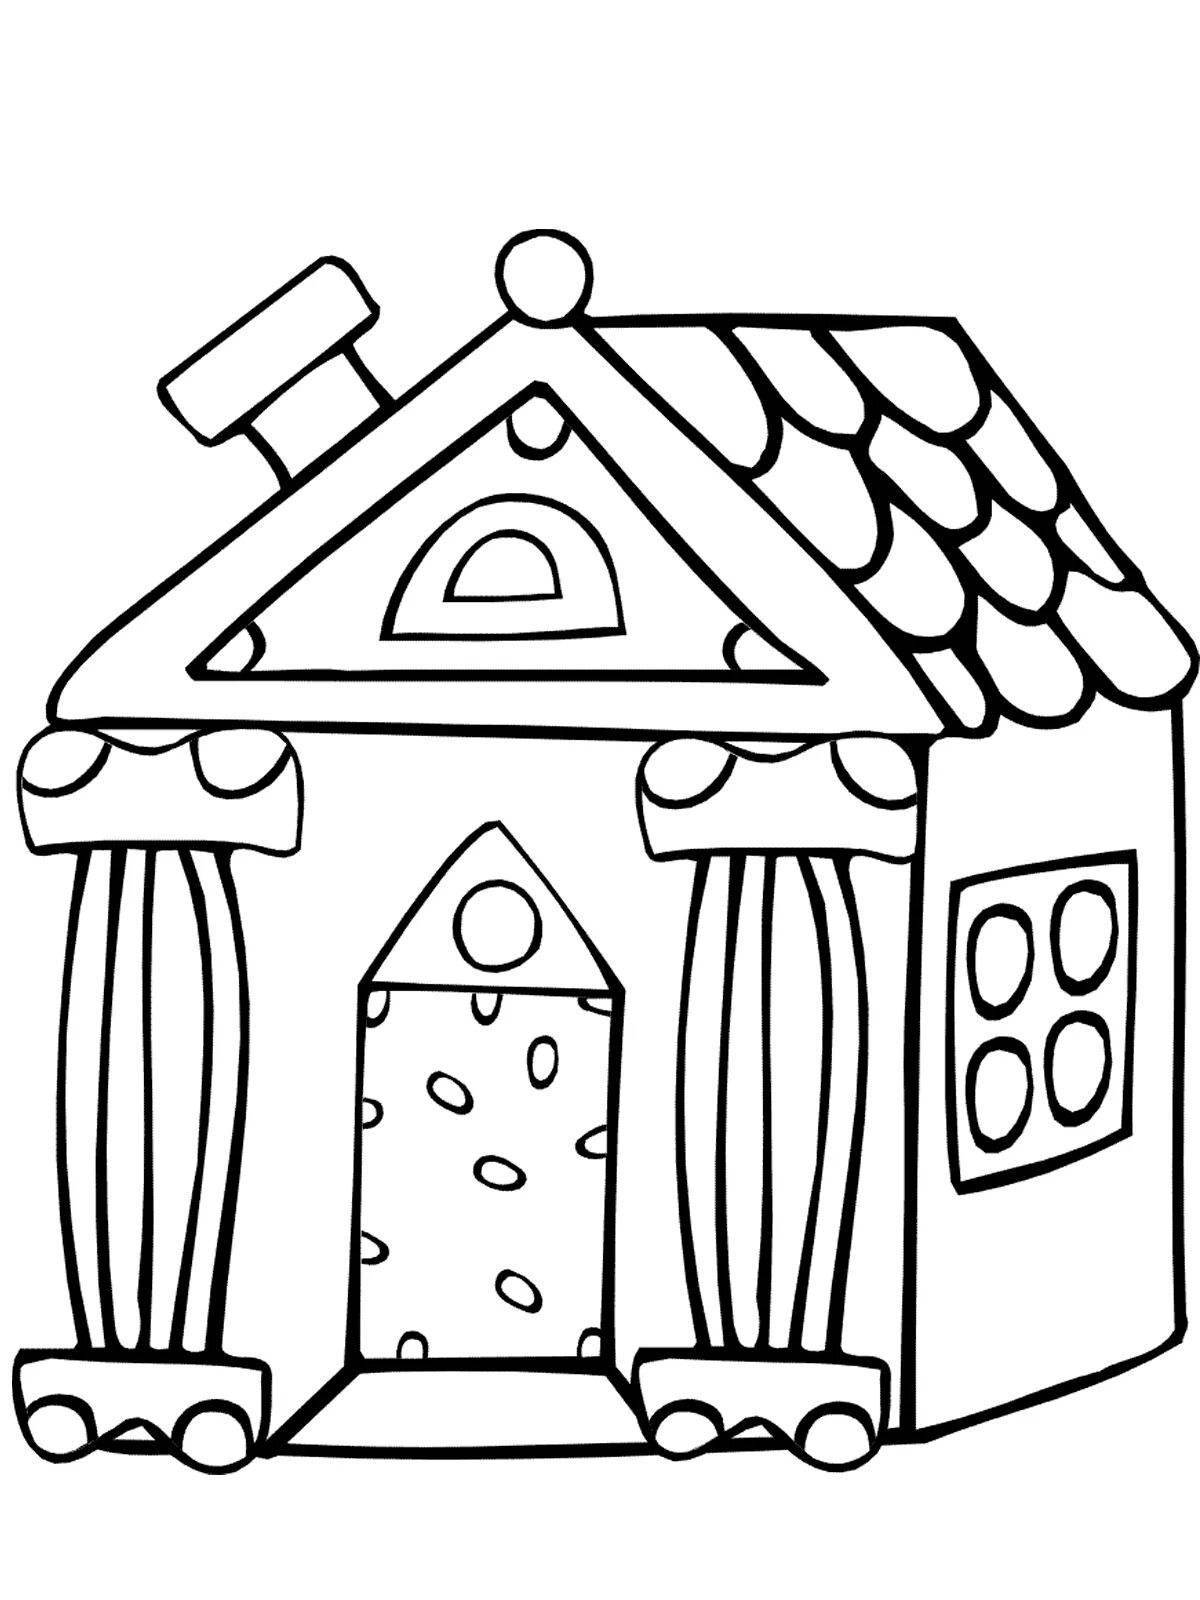 Coloring page joyful house for kids 2 3